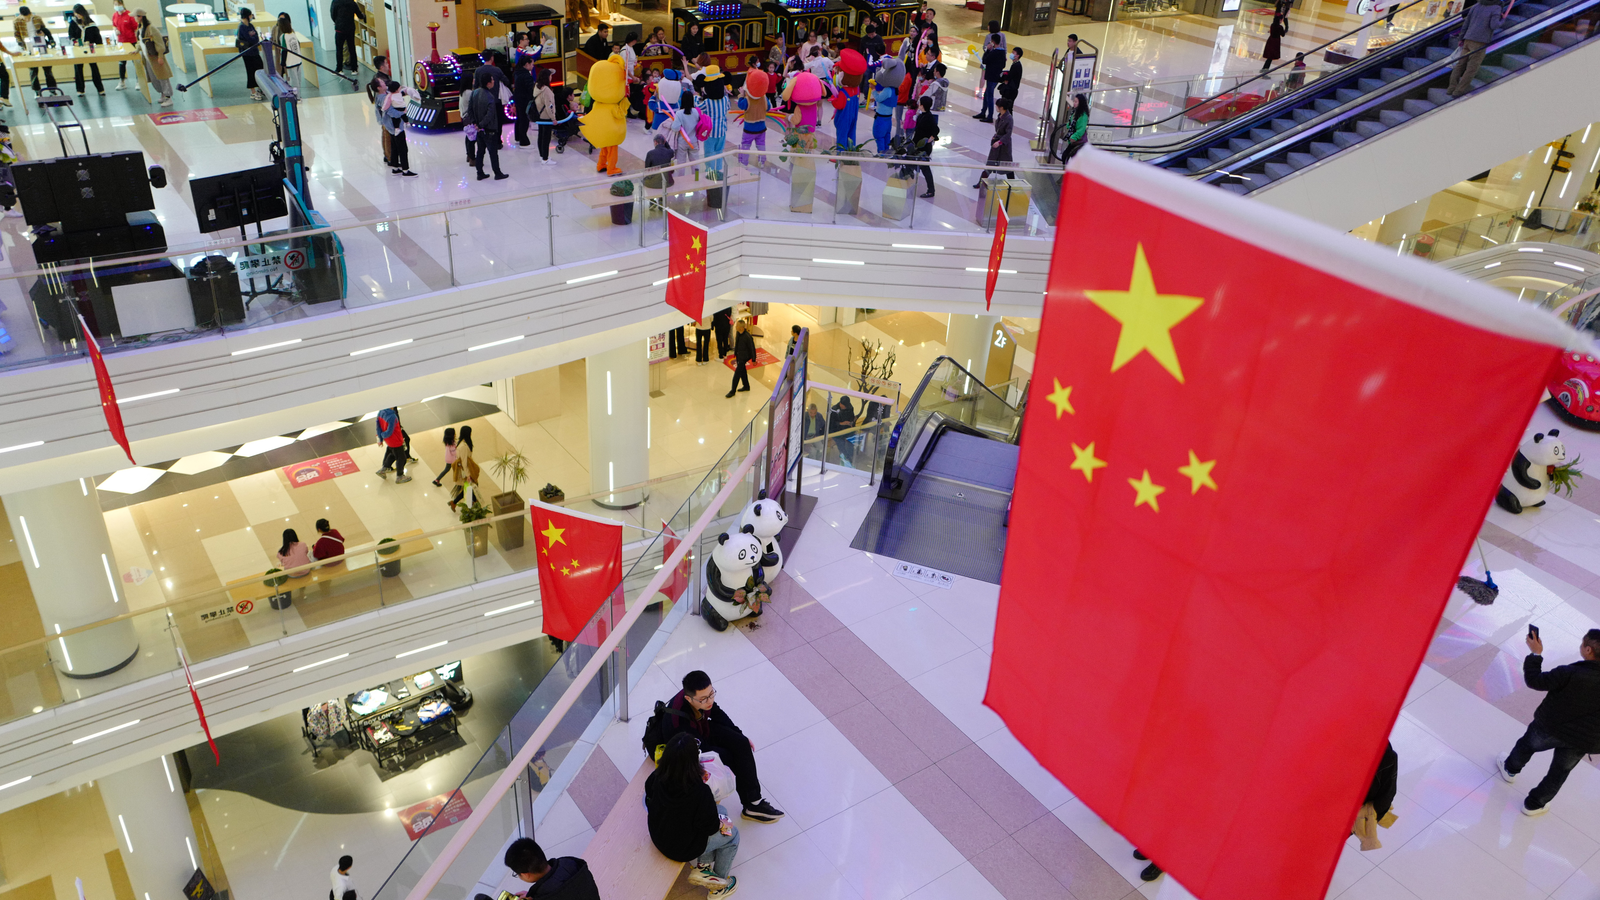 A large shopping mall in the central city is festooned with Chinese flags in celebration of the National Day after the victory against the Covid-19 epidemic.